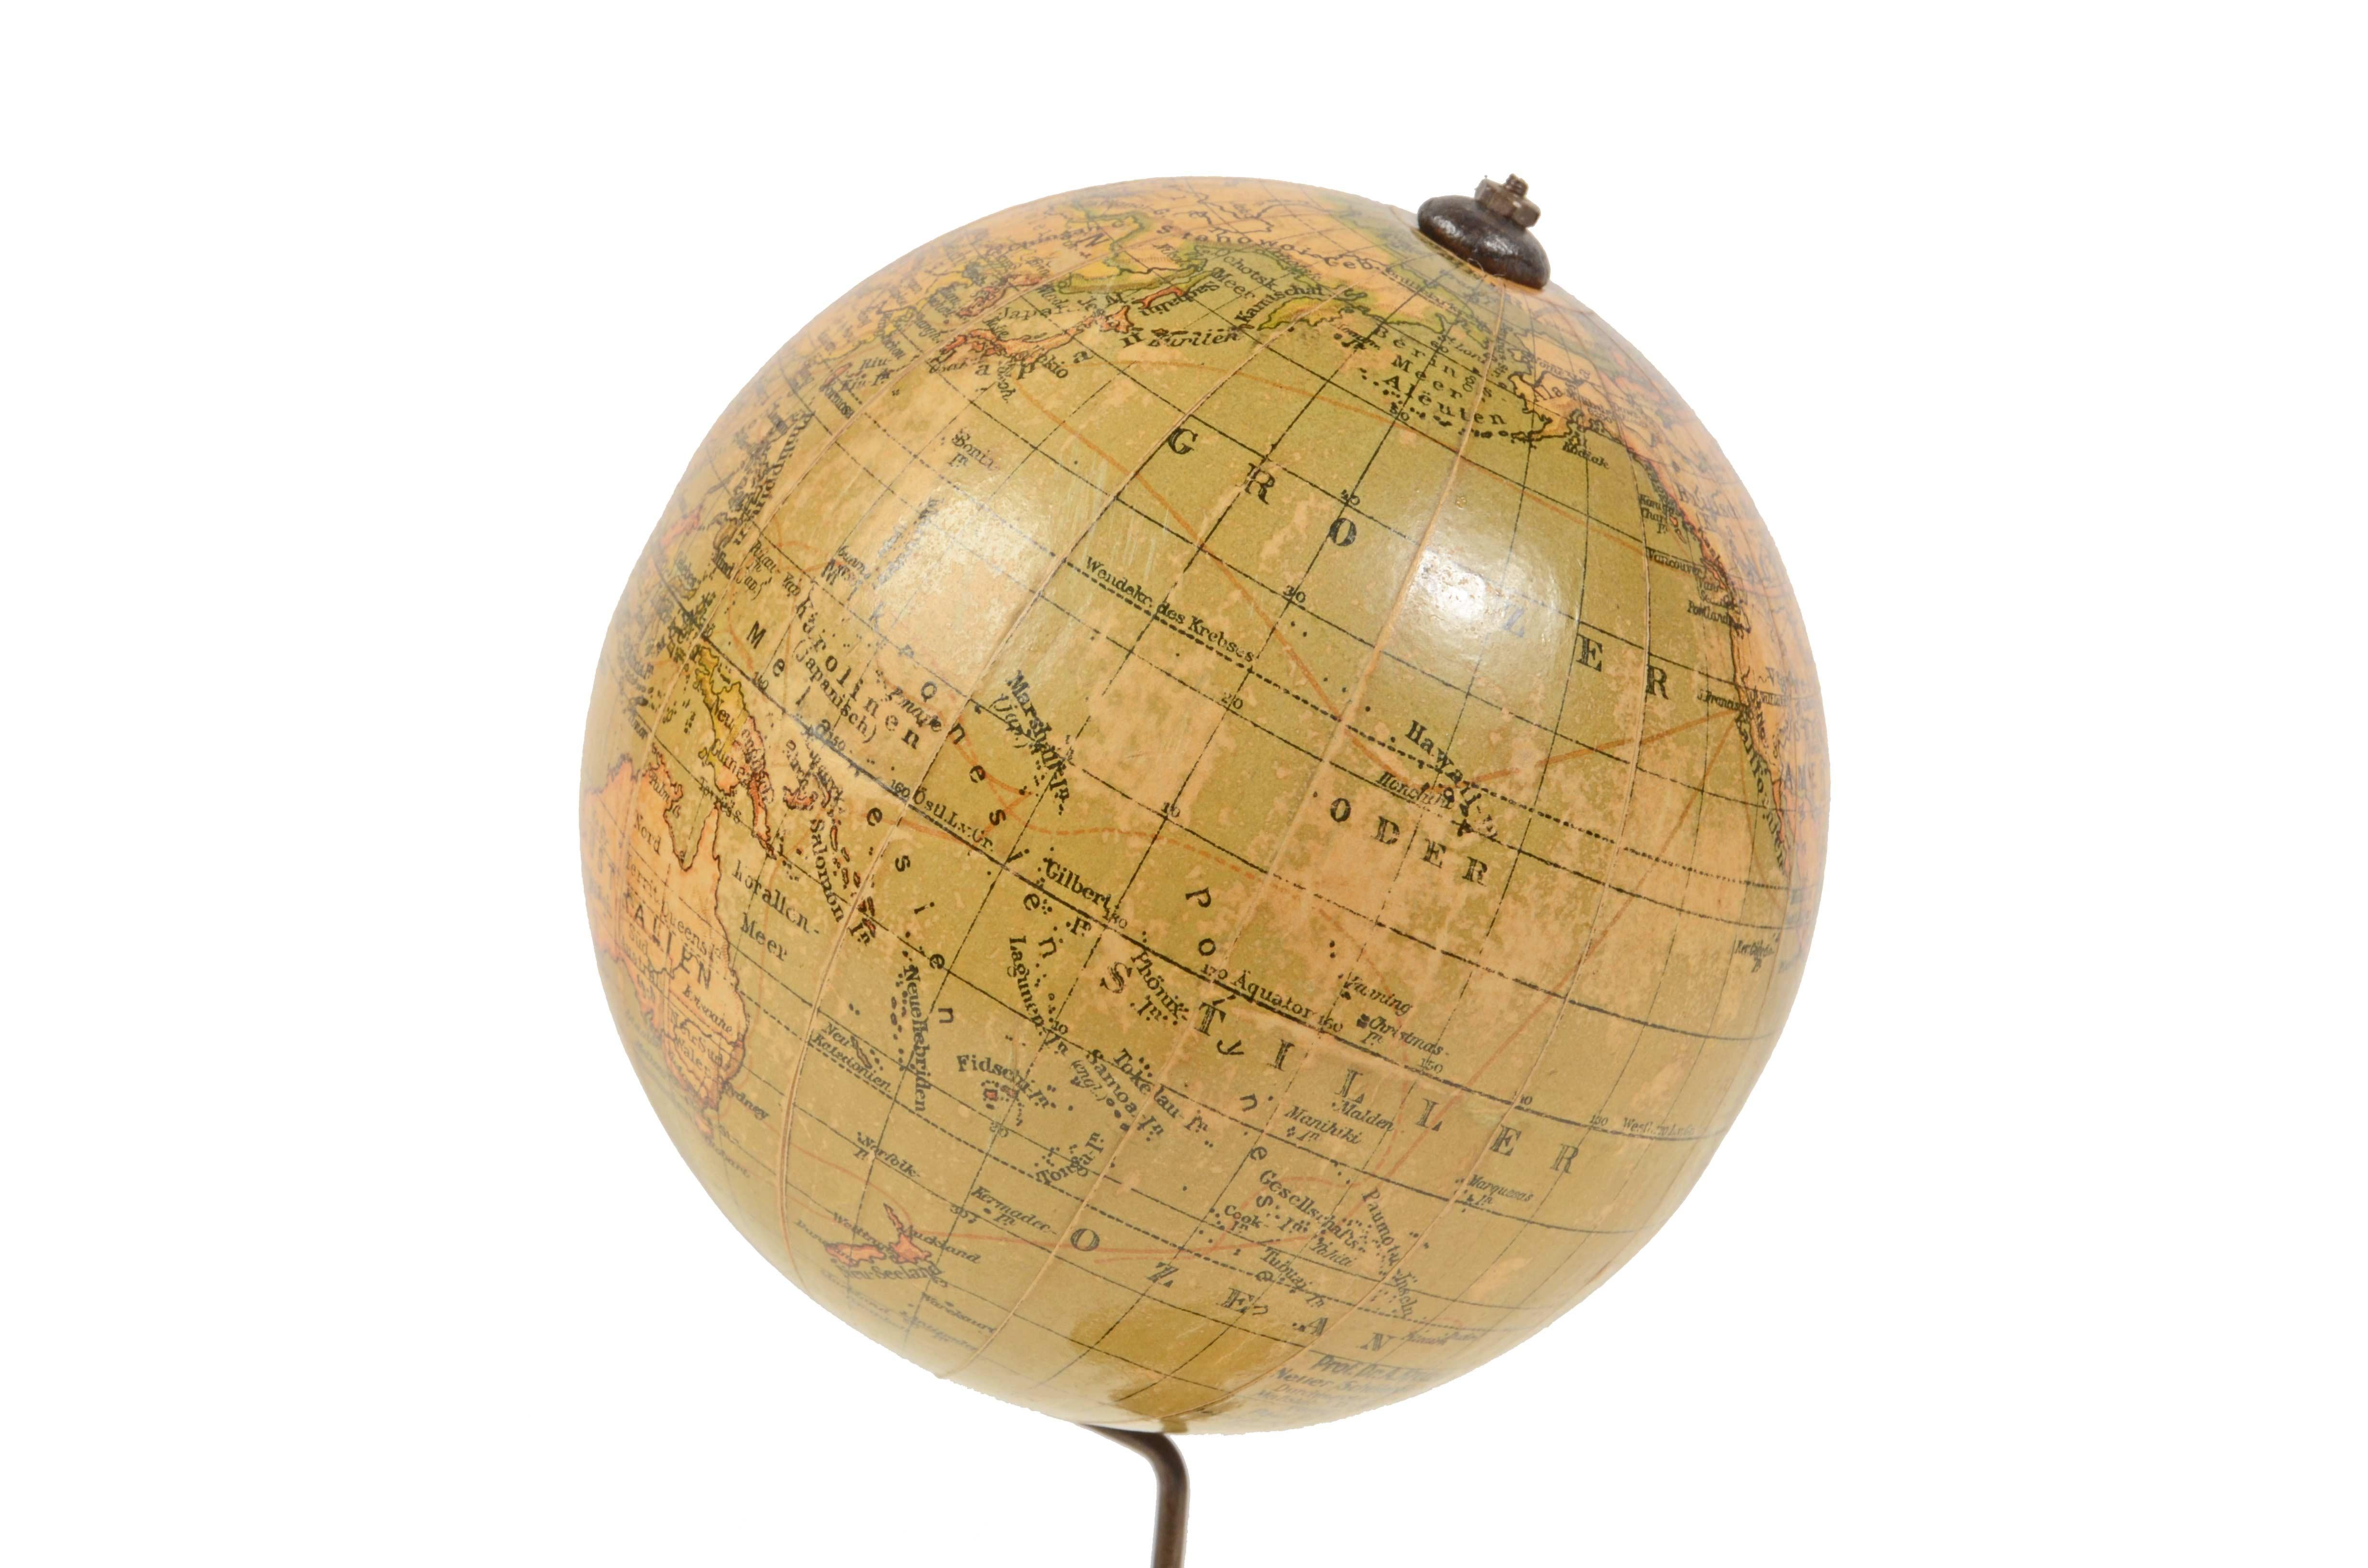 Late 19th Century 19th Century Small Terrestrial Globe Edited in Germany by Prof. Arthur Krause